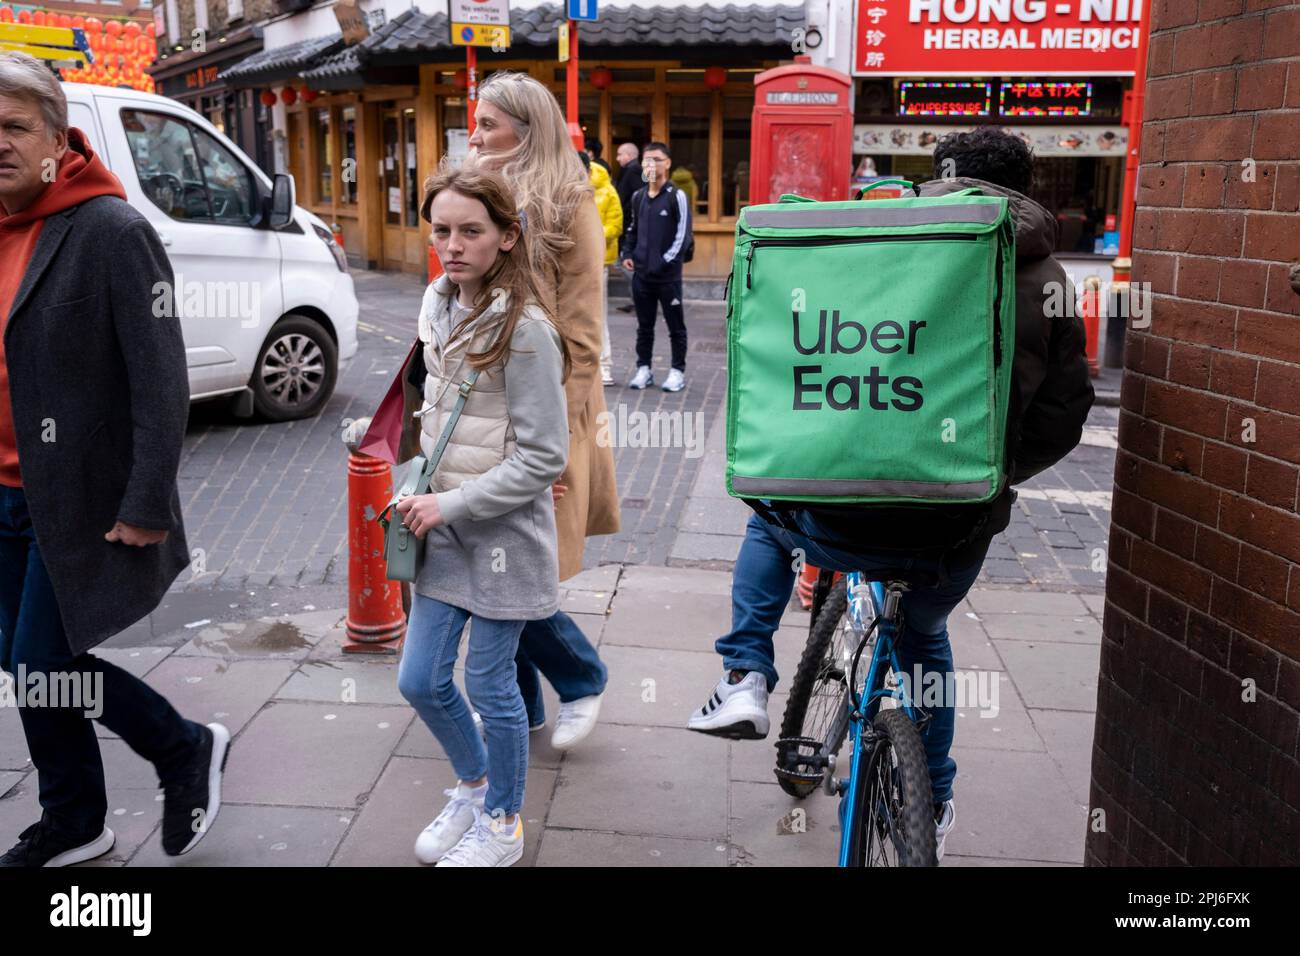 Uber Eats takeaway delivery cycle courier on 30th March 2023 in London, United Kingdom. Uber Eats is an online food ordering and delivery platform launched by Uber in 2014. It acts as an intermediary between independent takeaway food outlets and customers, with thousands of cycle couriers delivering food by bicycle and other forms of transport. Gig workers are independent contractors, online platform workers, contract firm workers, on-call workers and temporary workers. Gig workers enter into formal agreements with on-demand companies to provide services to the companys clients. Stock Photo